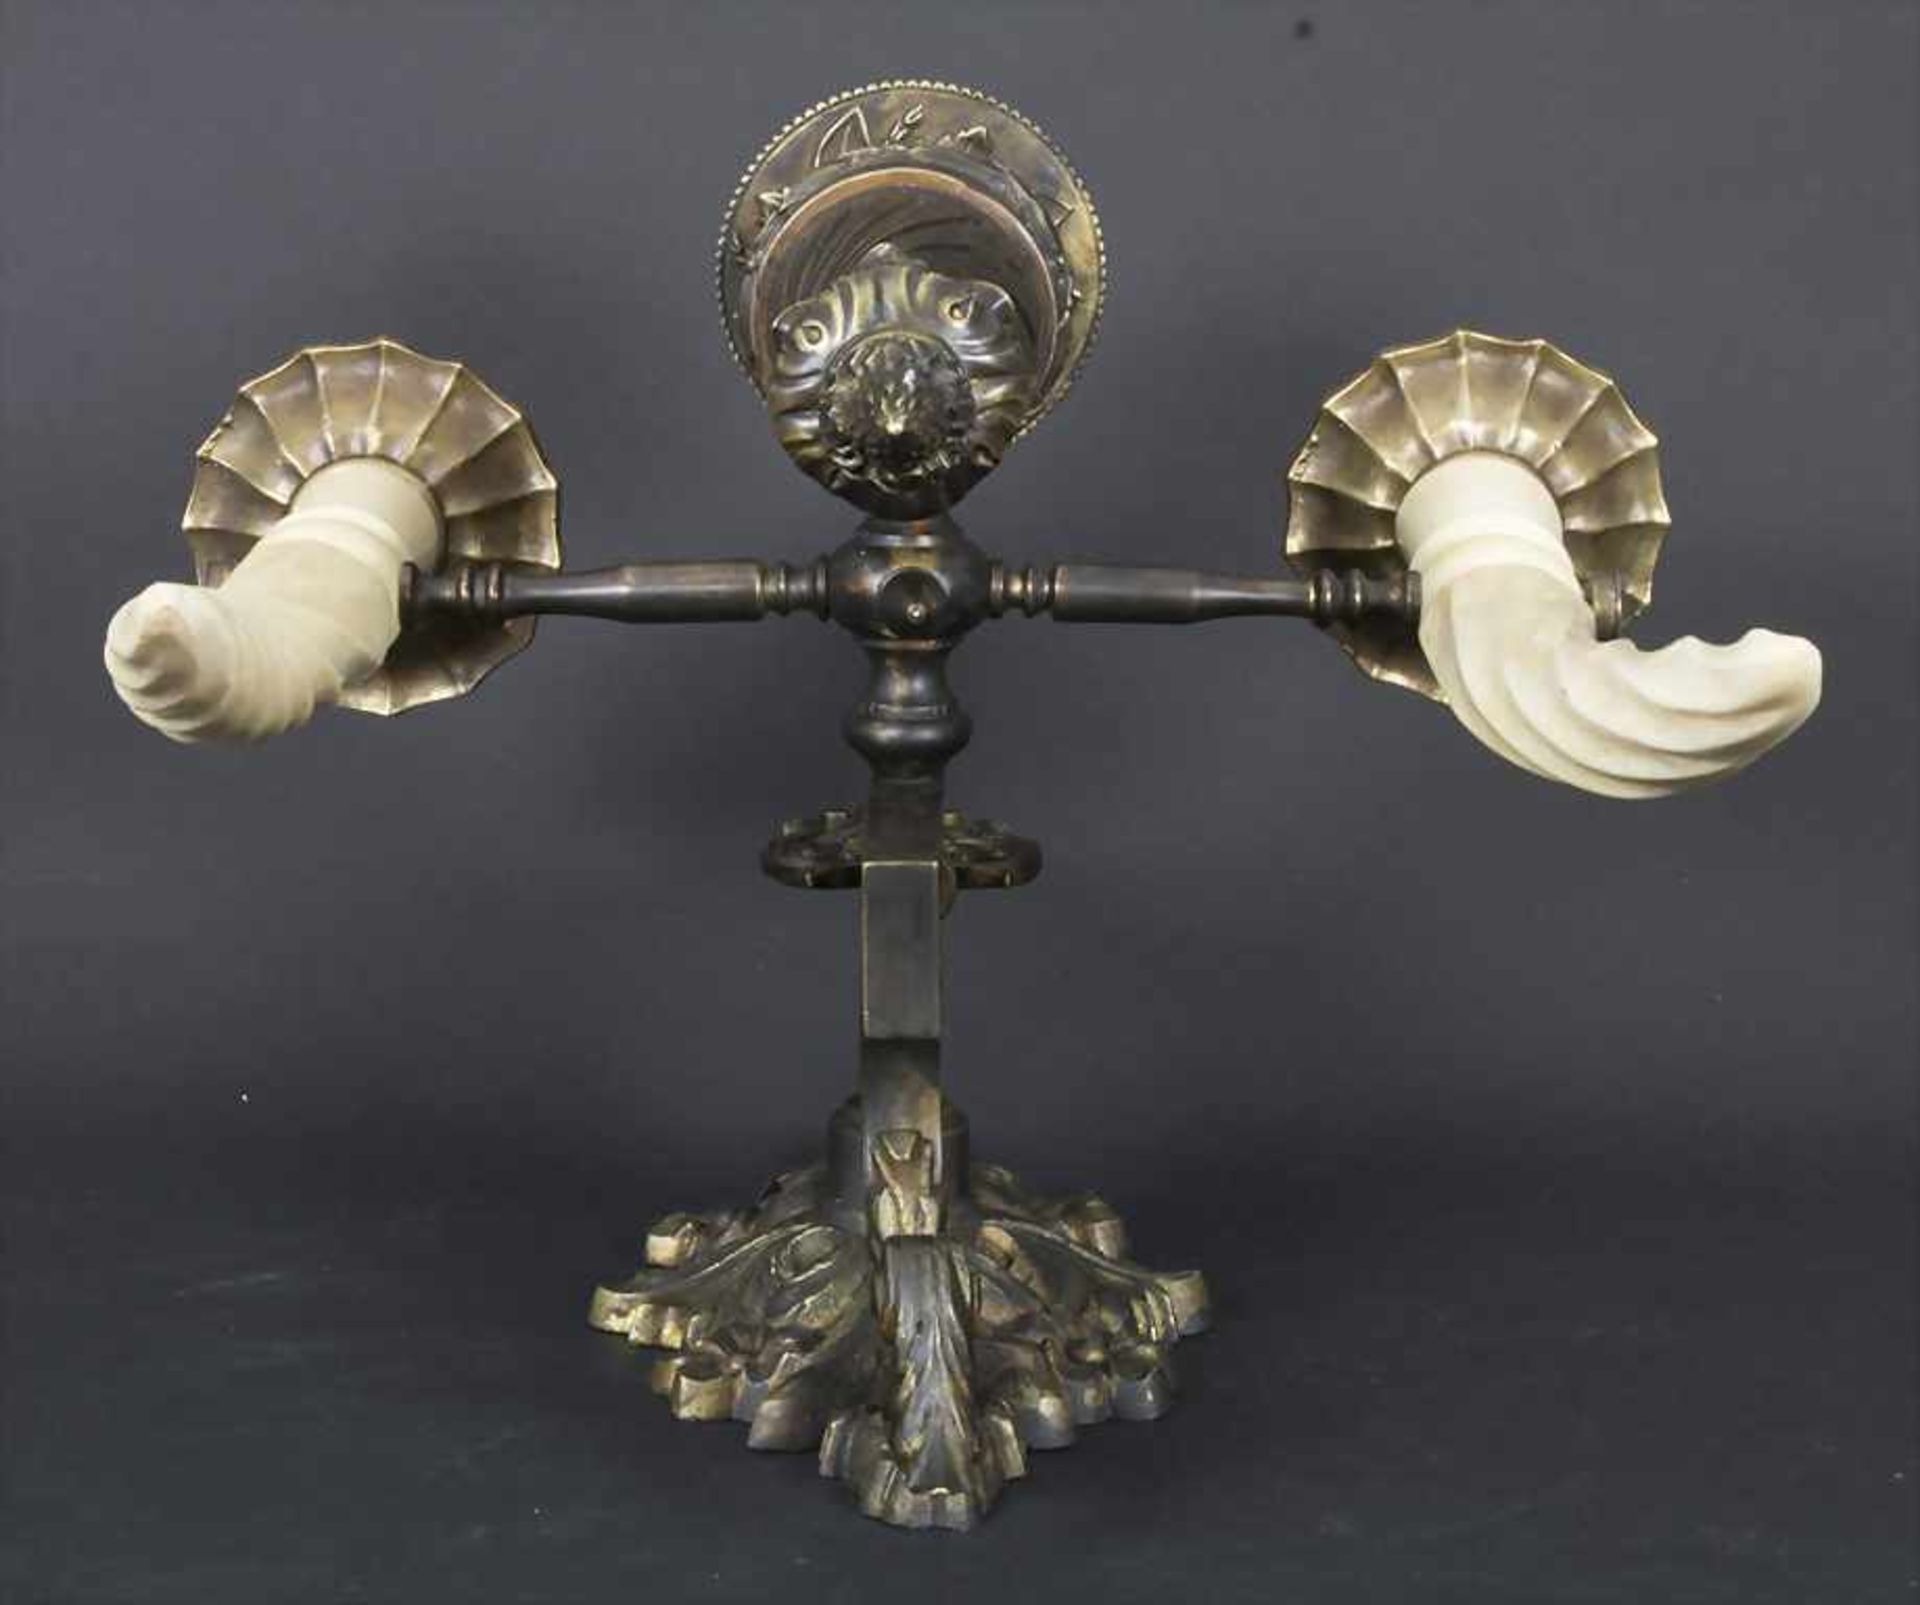 Wandhalter mit Kerzenleuchtern / A wall holder with candle sticks, 19. Jh.Material: Bronze, - Image 4 of 5